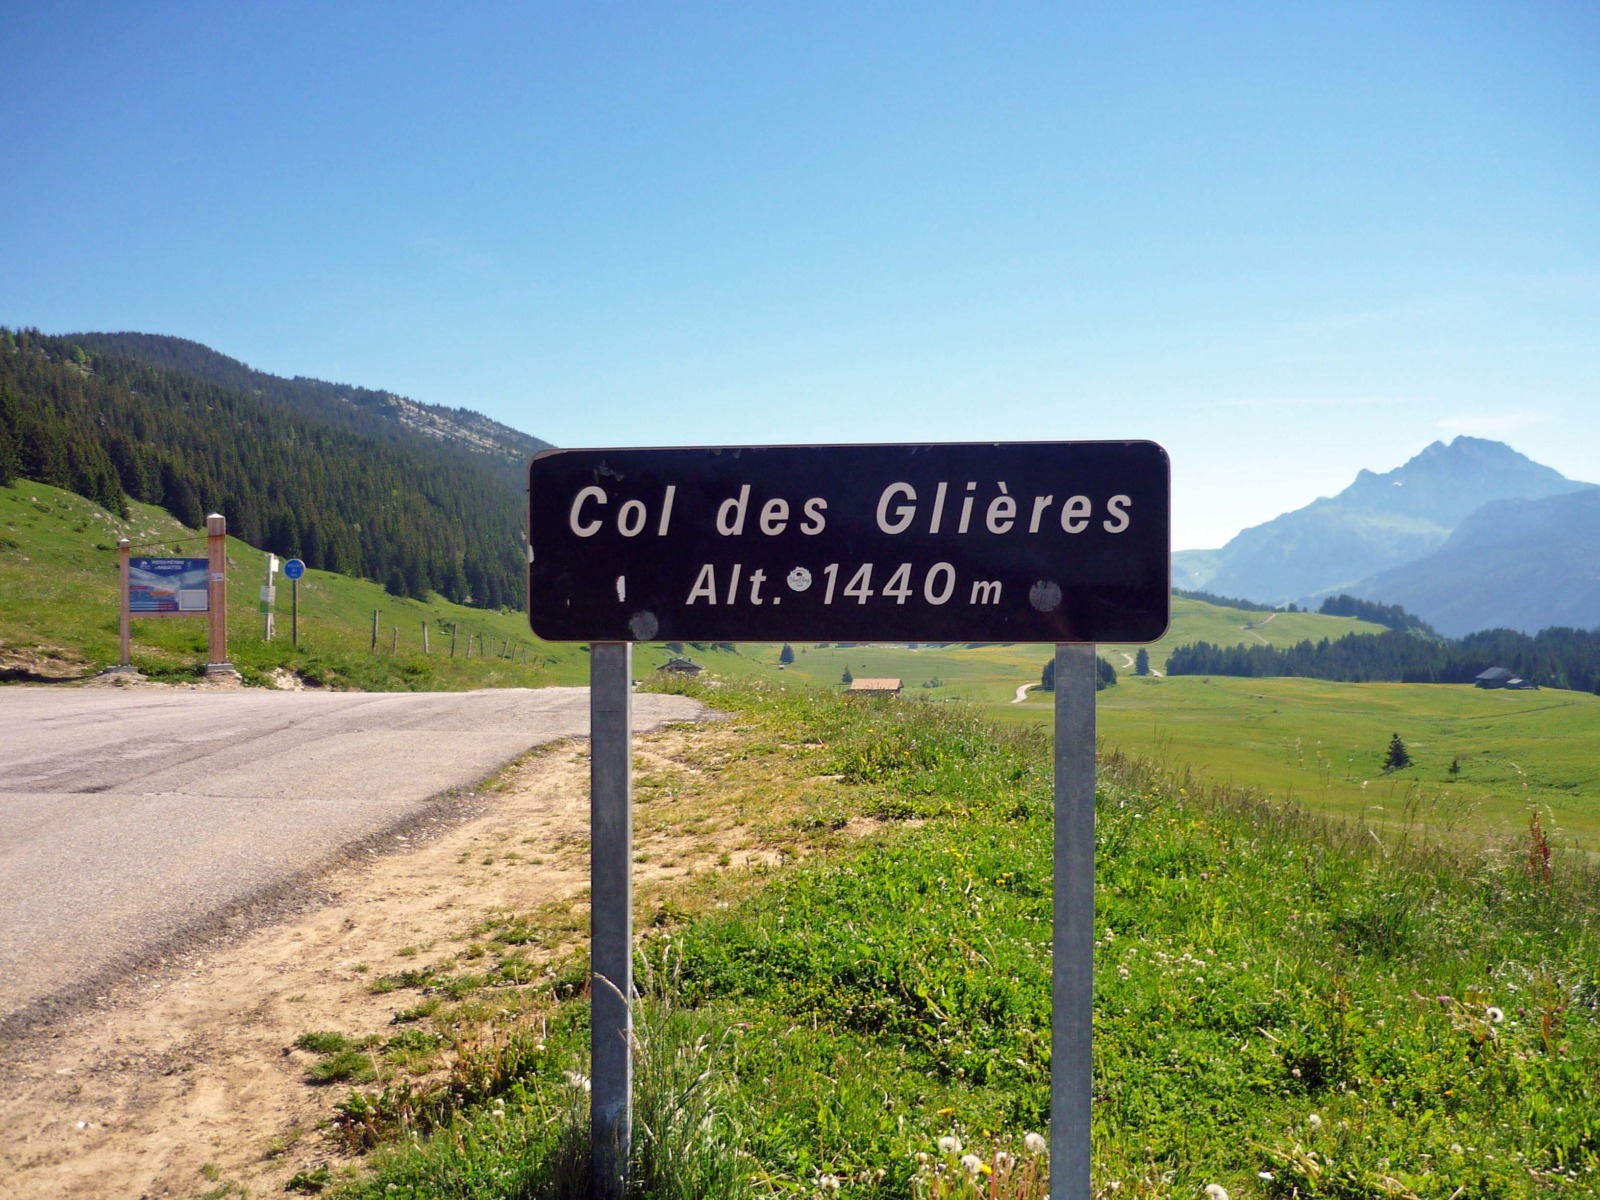 Around Annecy - the Plateau des Glières © French Moments